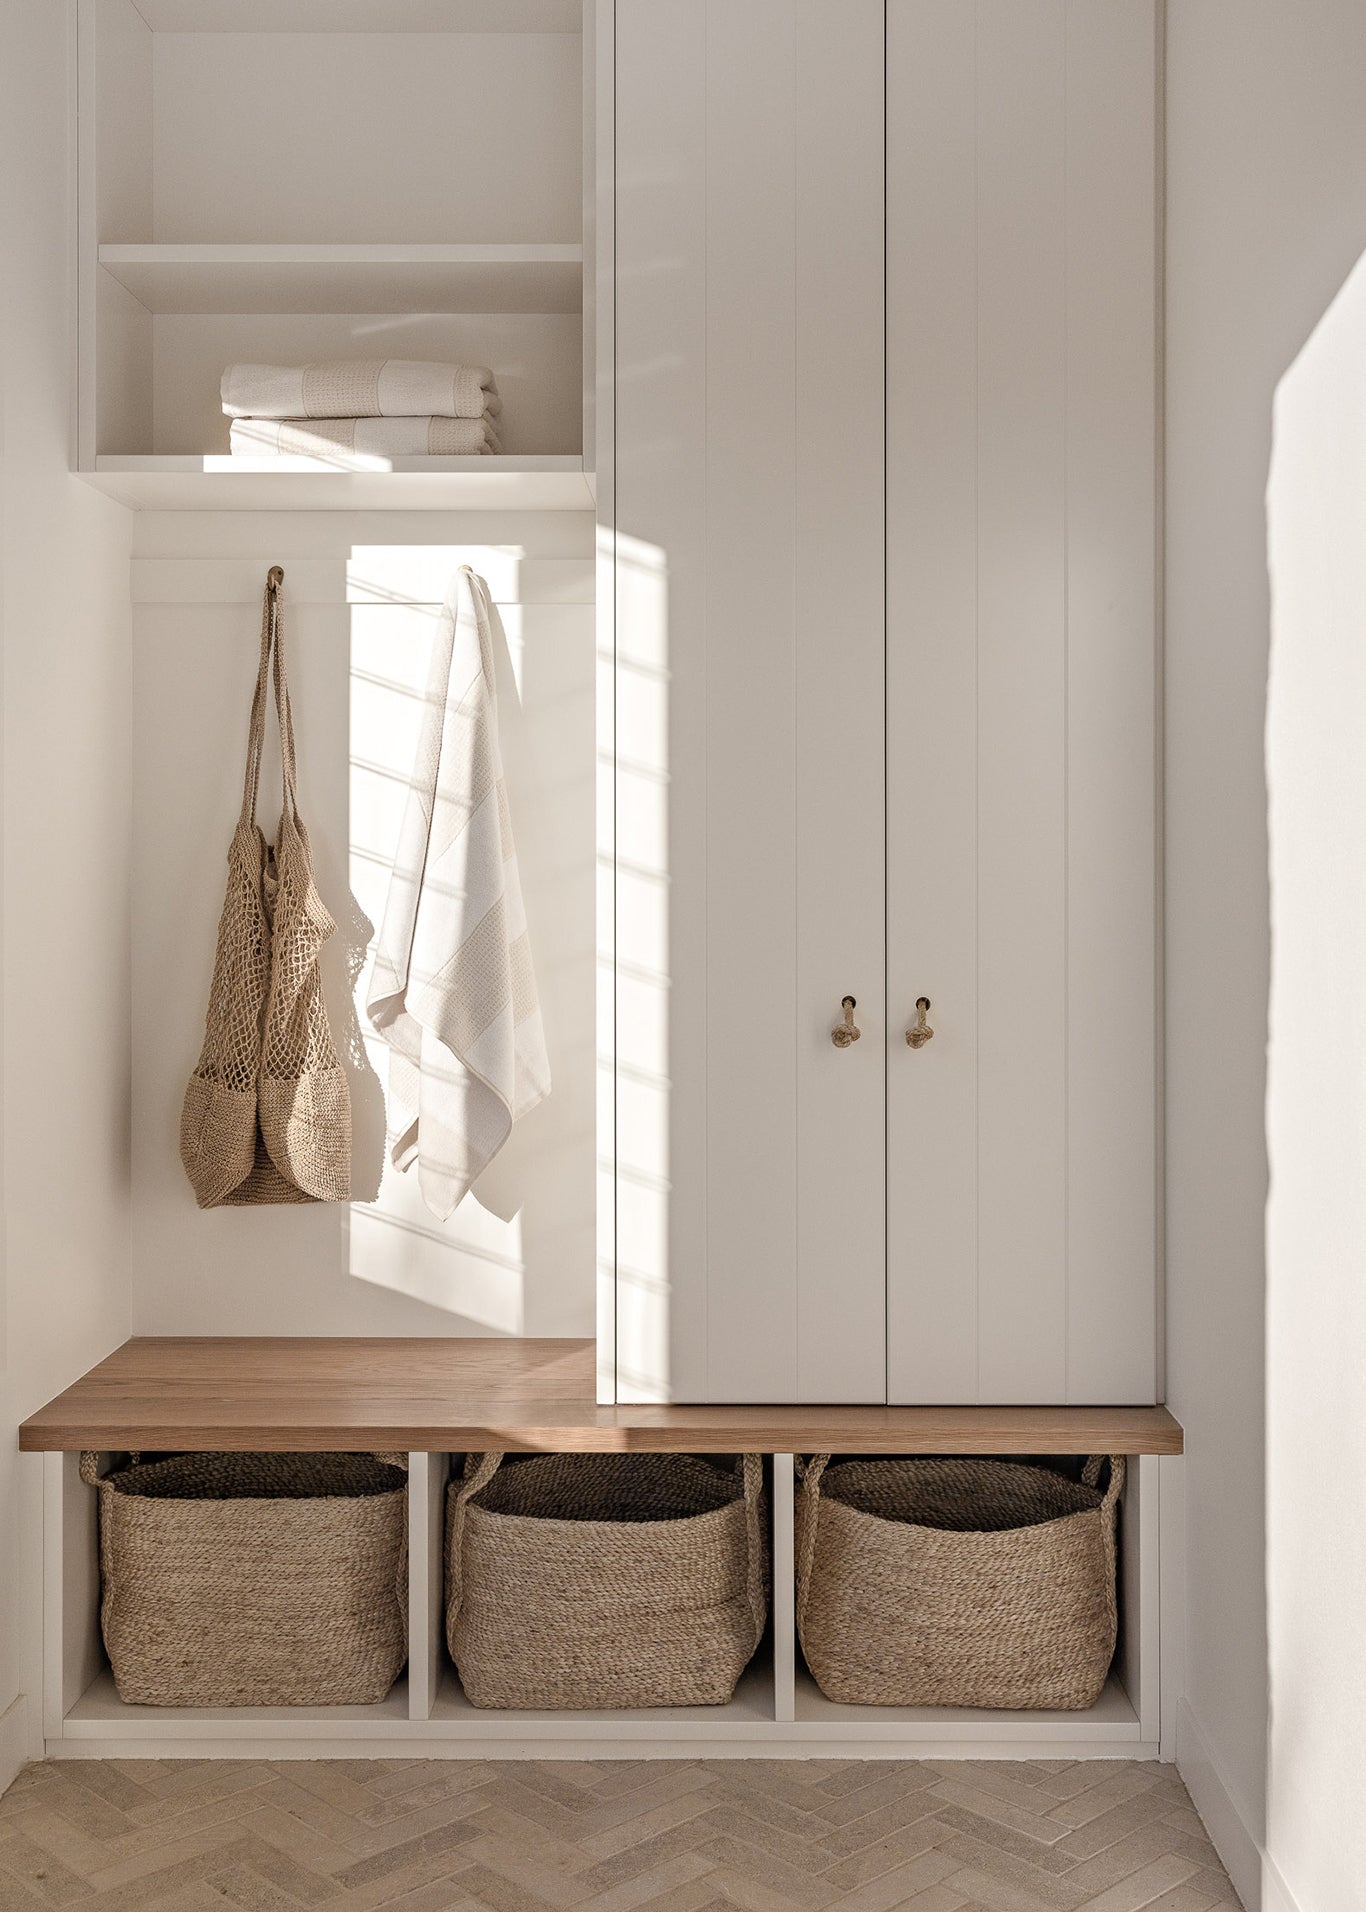 How to Design a Mudroom for Function & Style